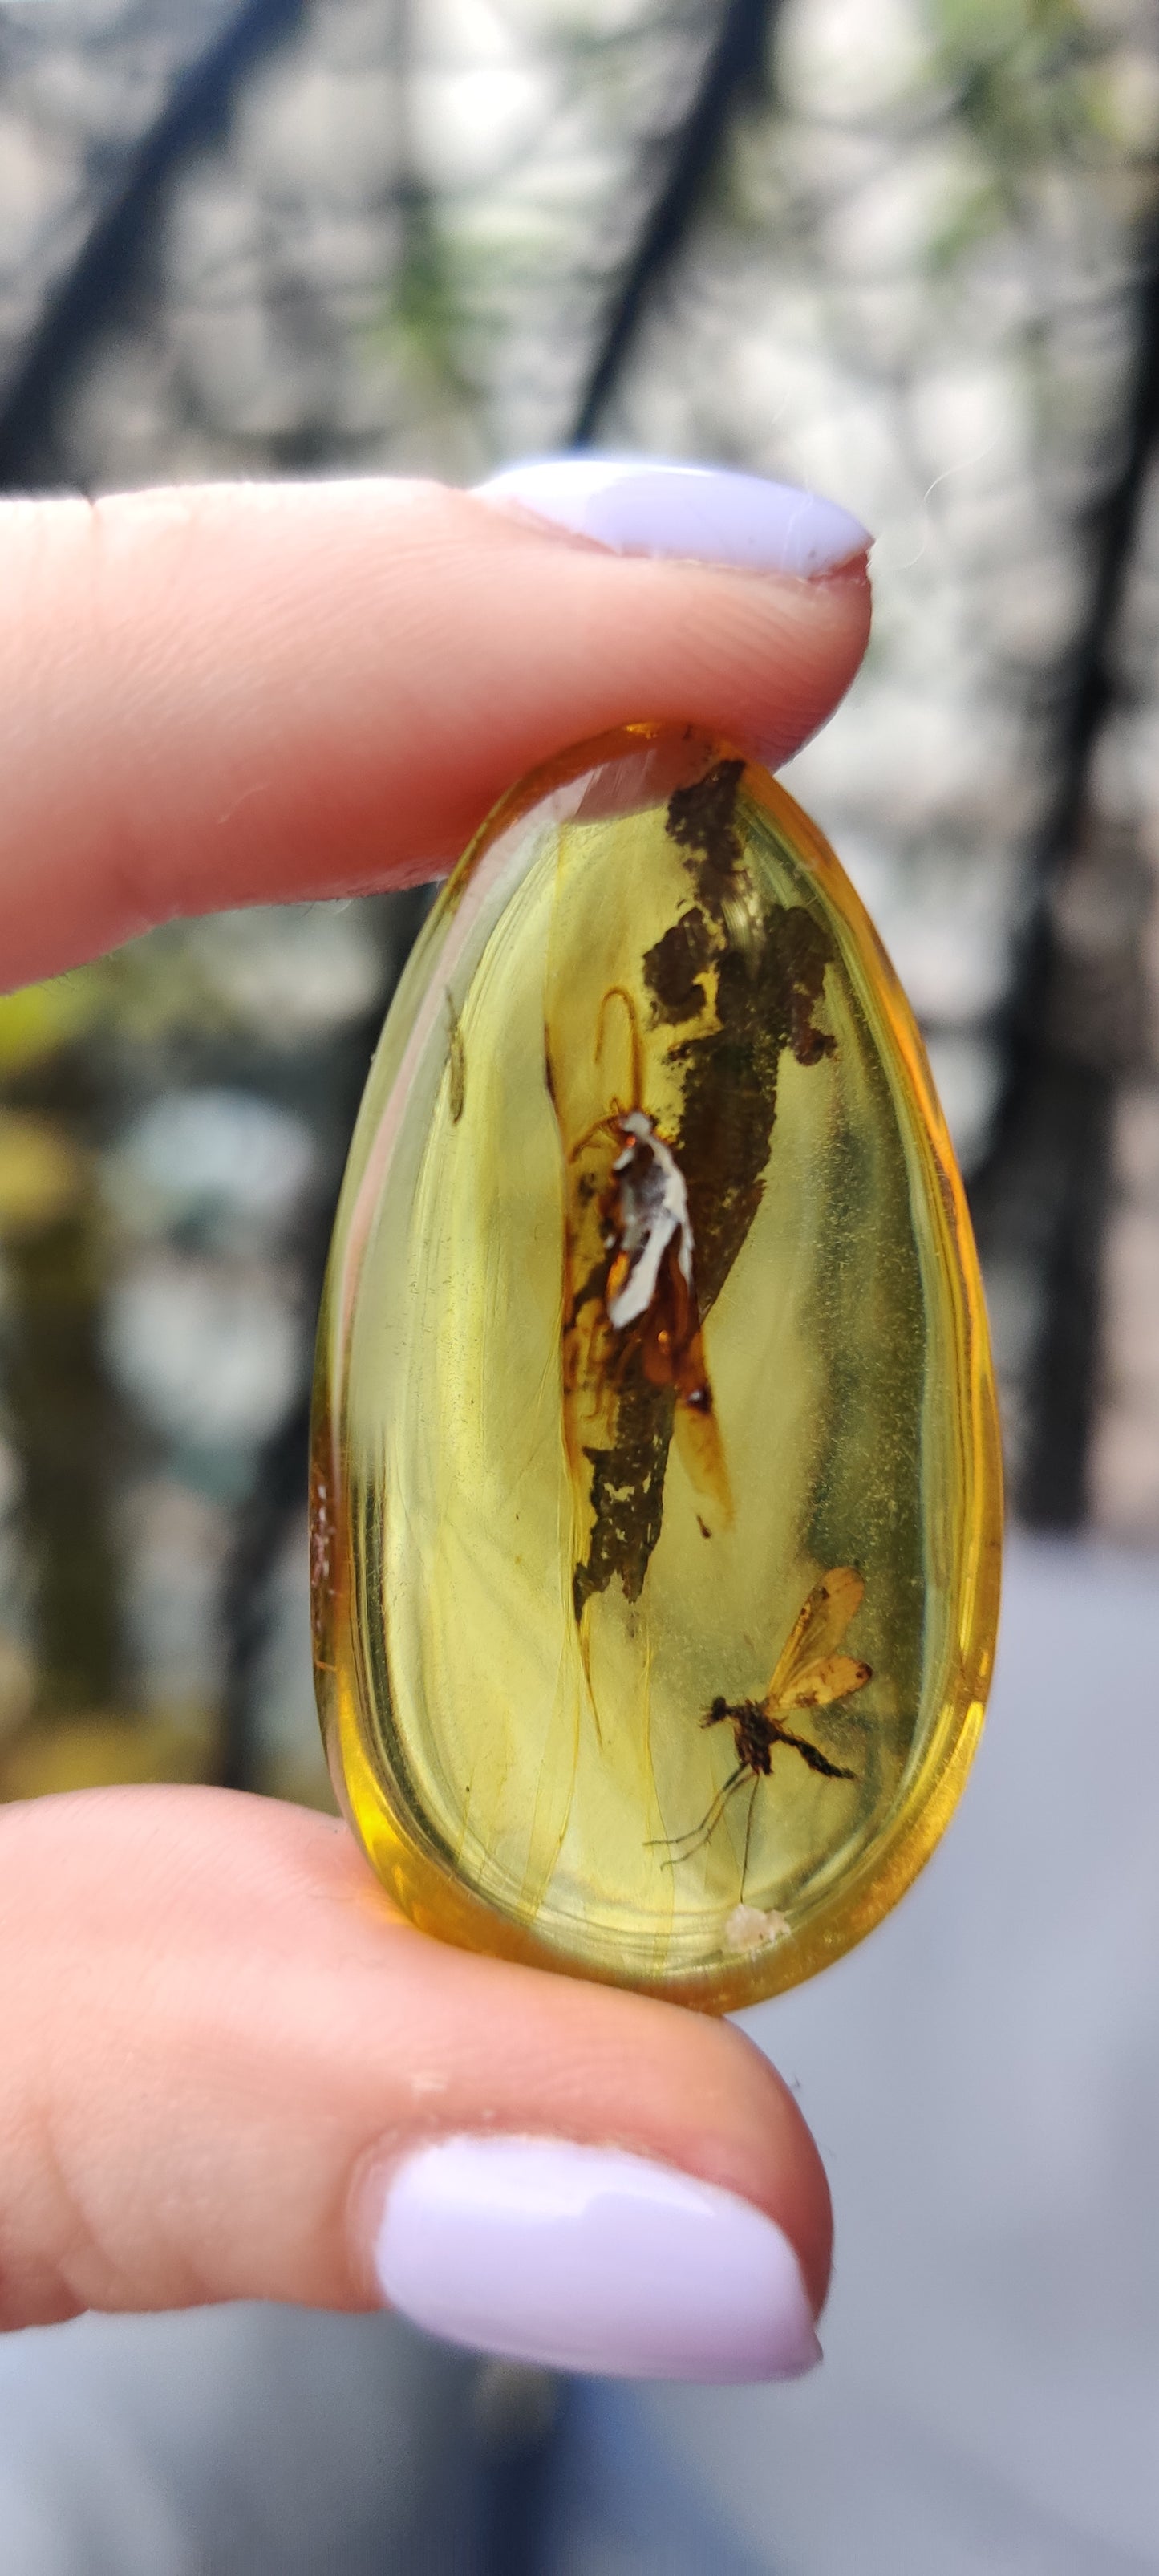 Rare and Unique Amber Raw Piece with Mosquito and Cocroach Type Insect Inclusion